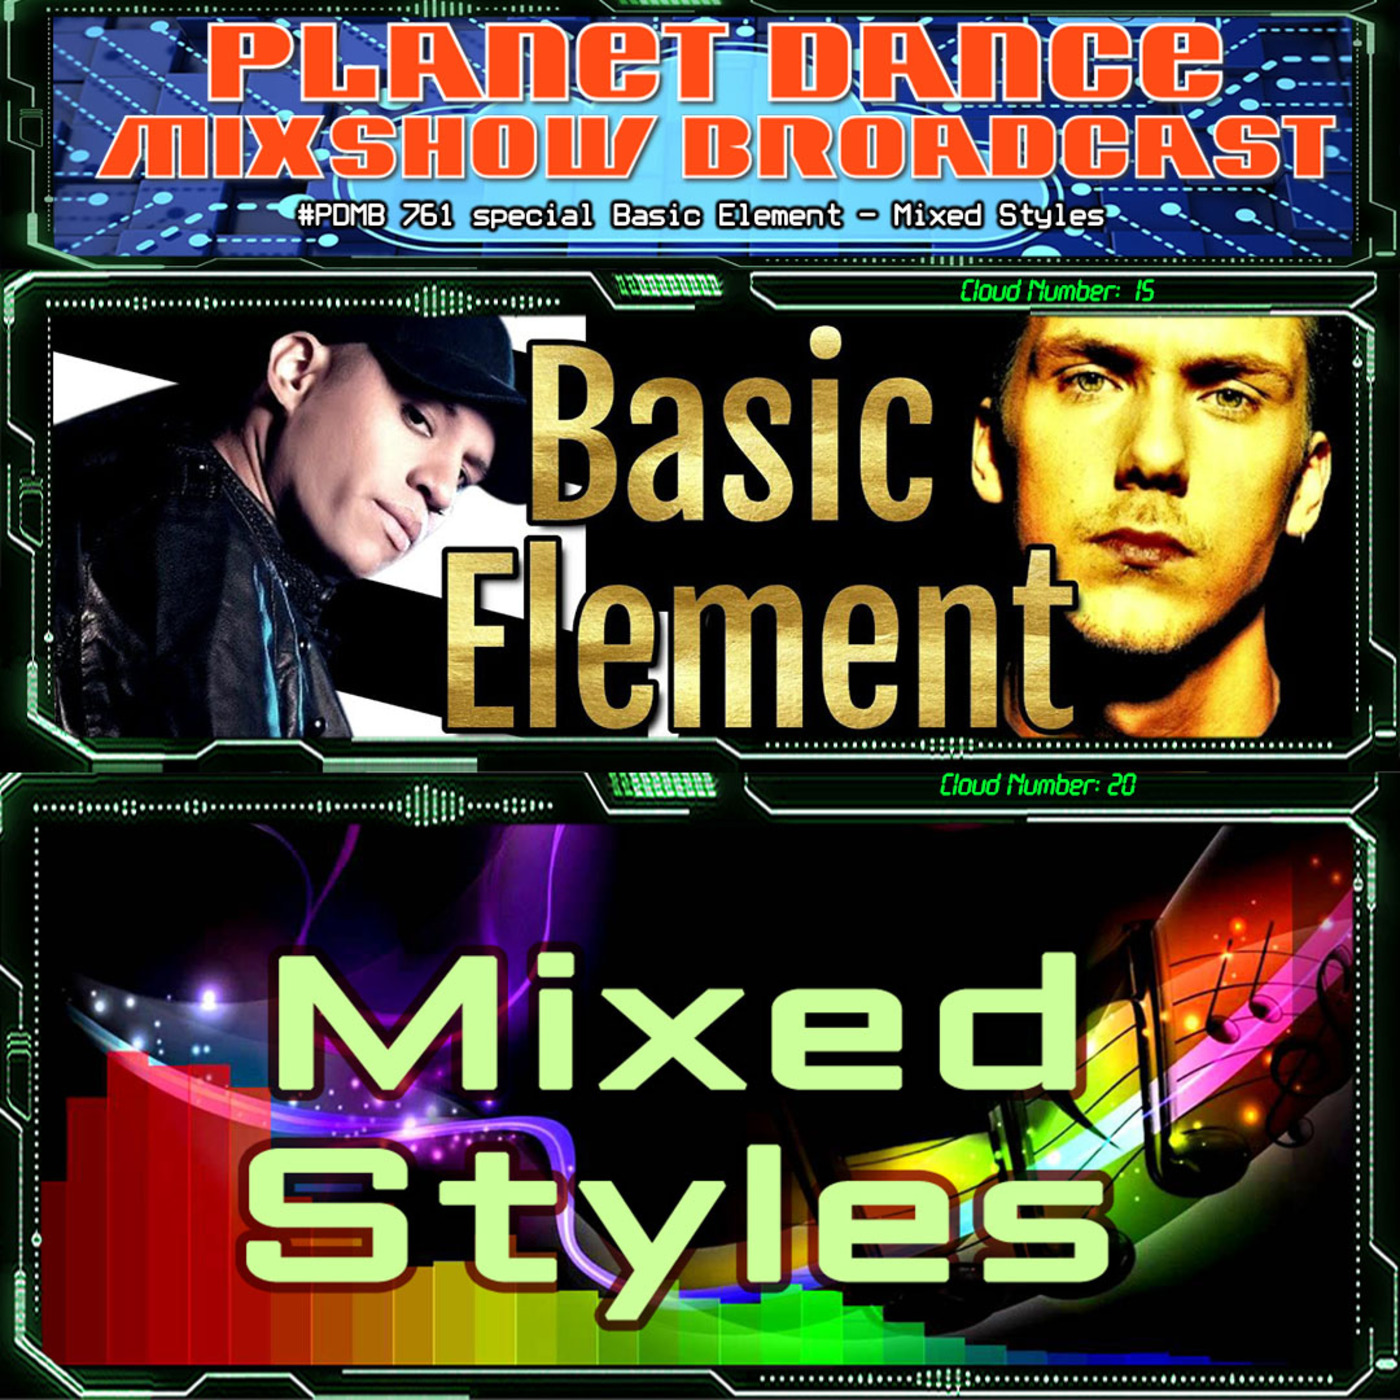 Planet Dance Mixshow Broadcast 761 special Basic Element - Mixed Styles